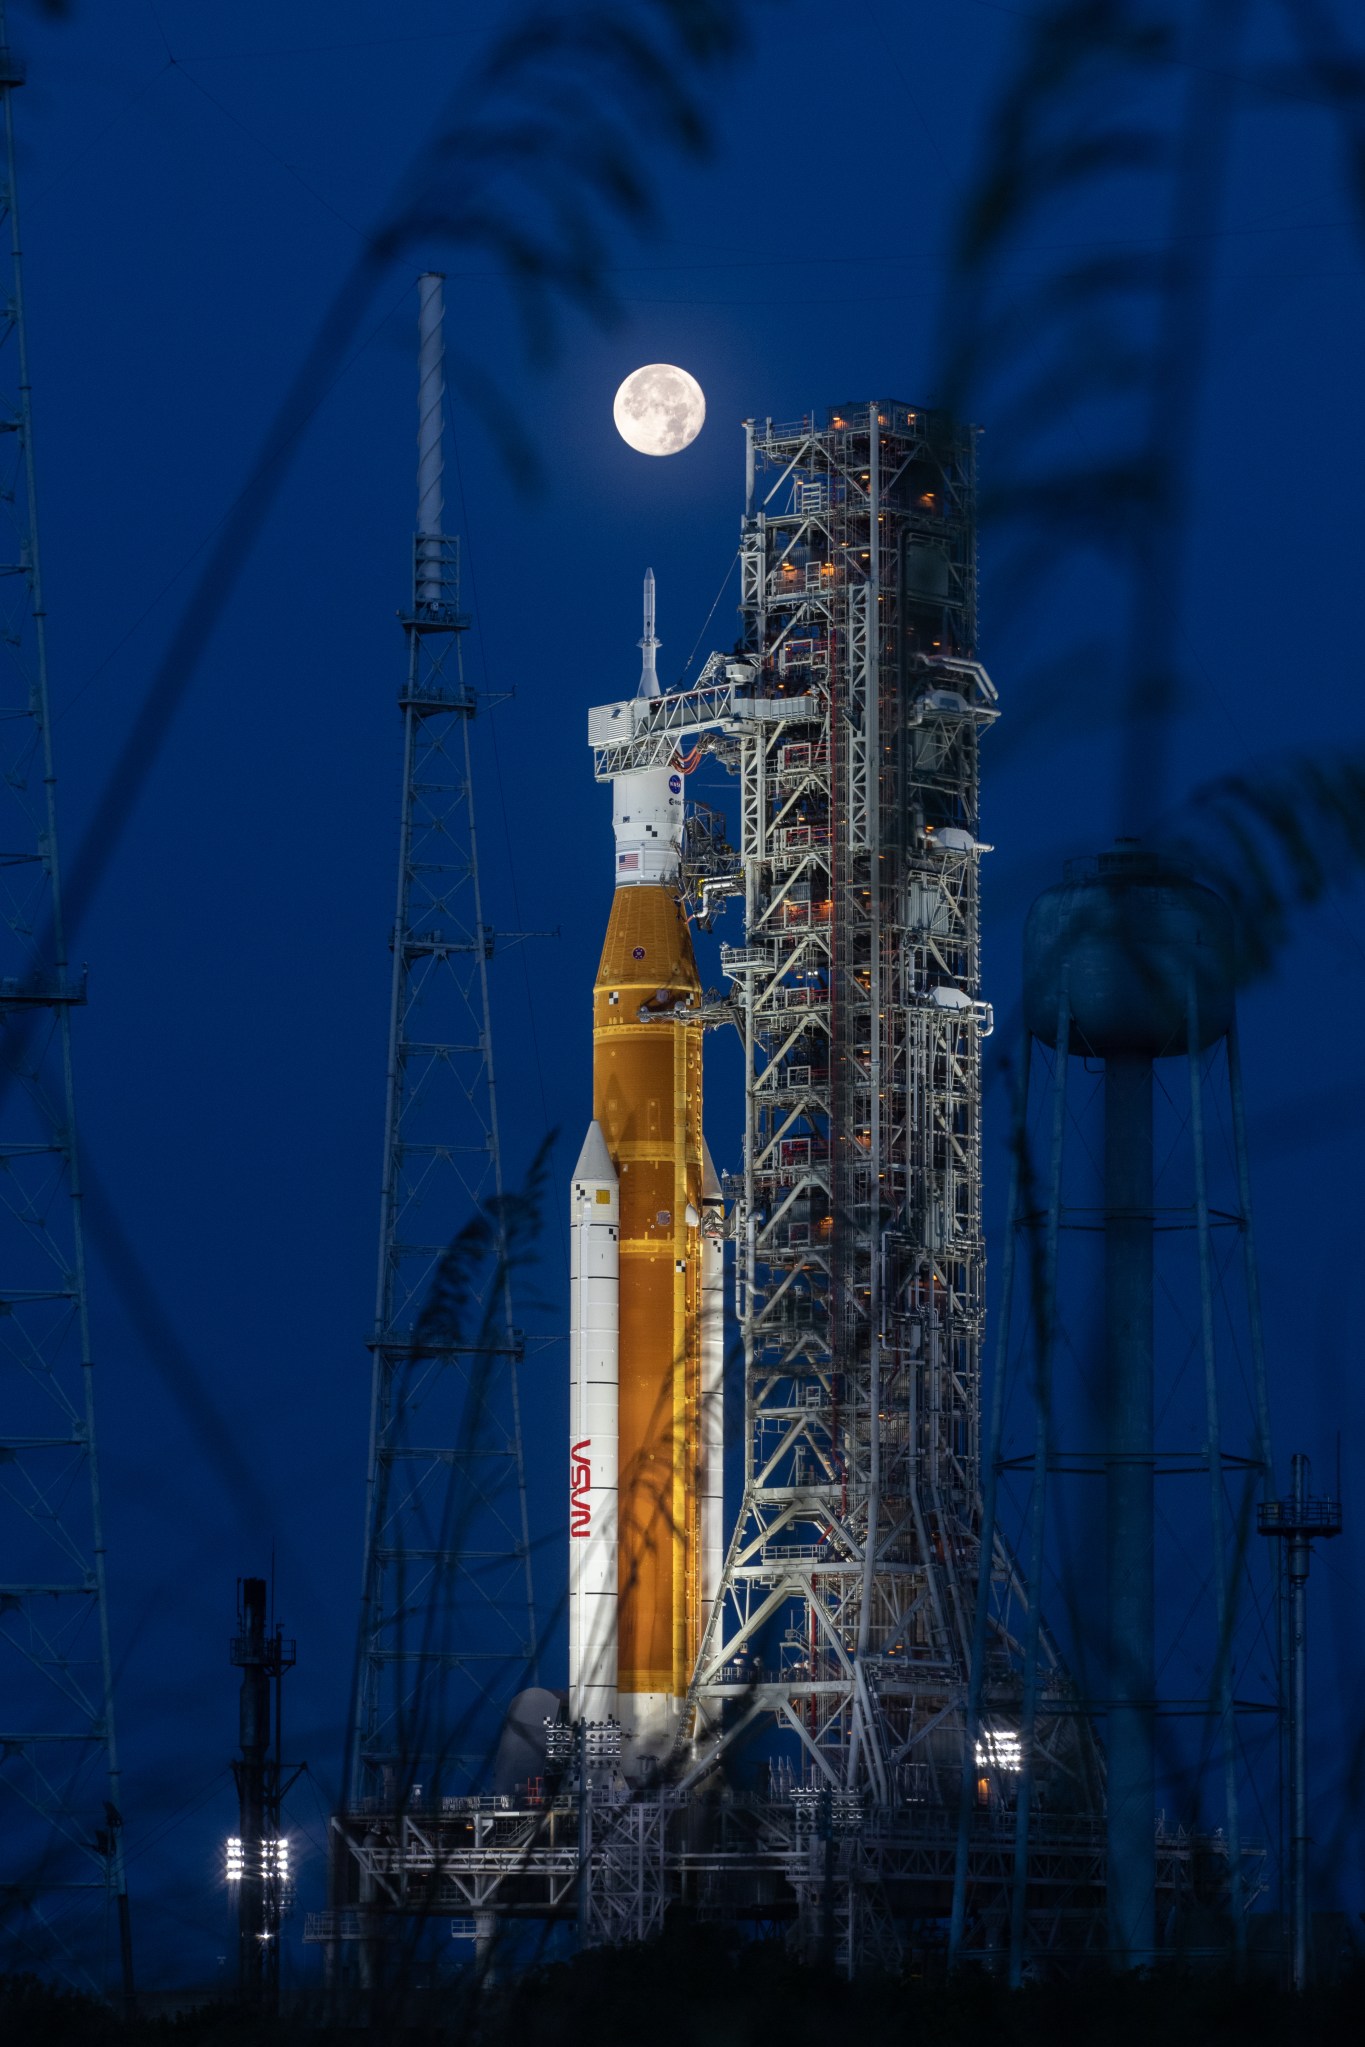 A full Moon can be seen above the Space Launch System rocket, poised at the launch pad at night. 